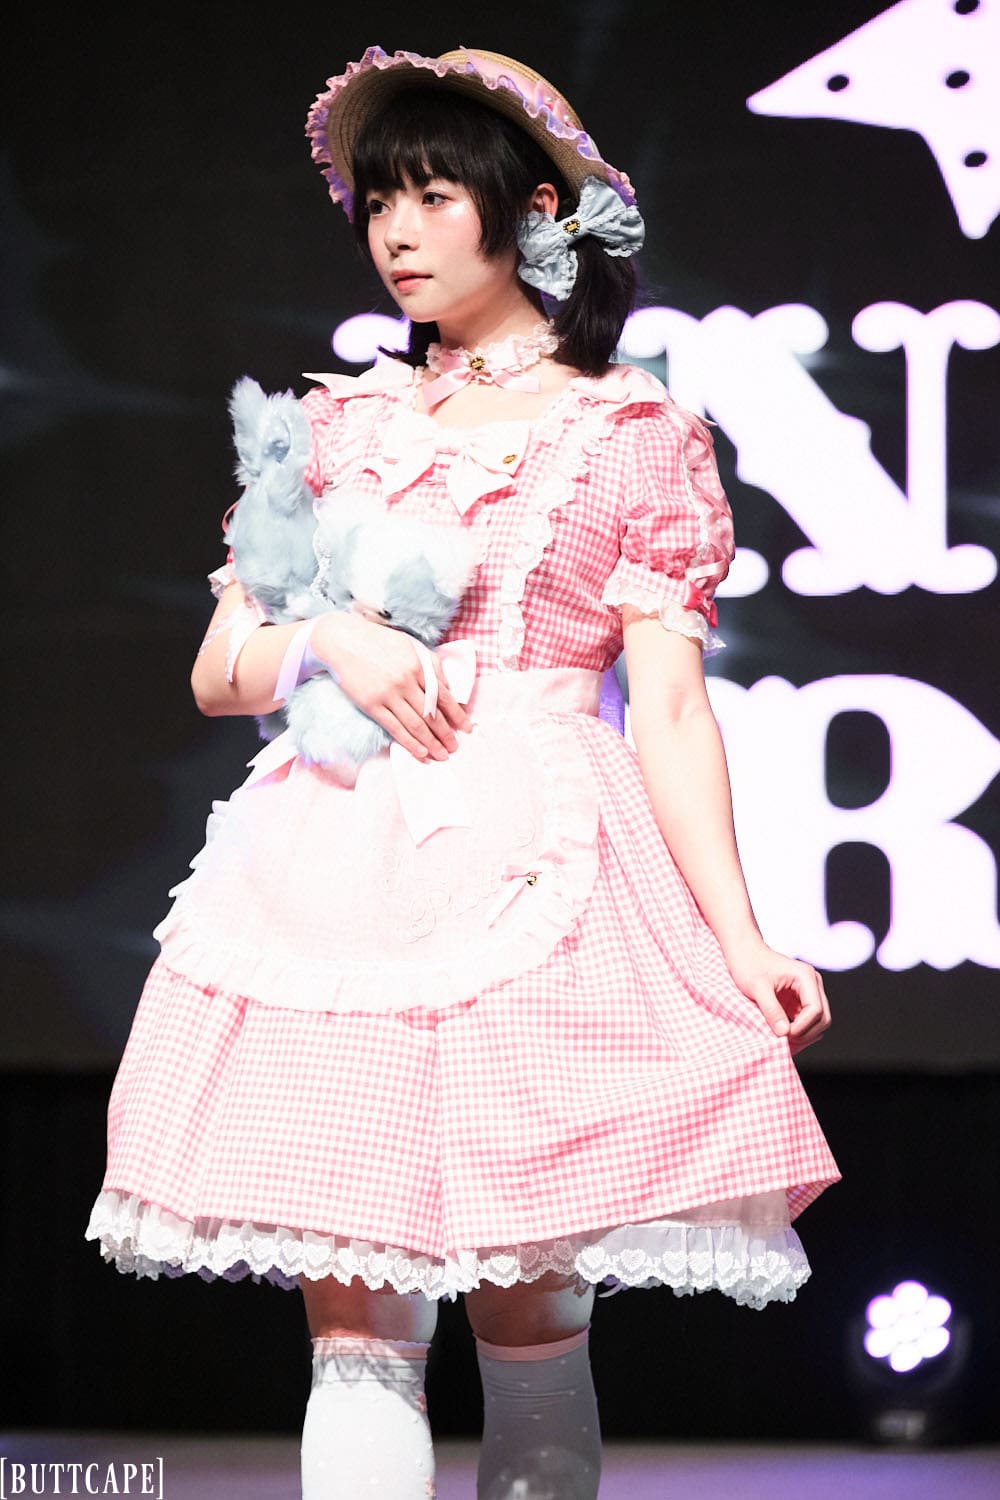 Model 11 wearing pink and white gingham lolita dress and boater hat holding two stuffed animals - half body 3.